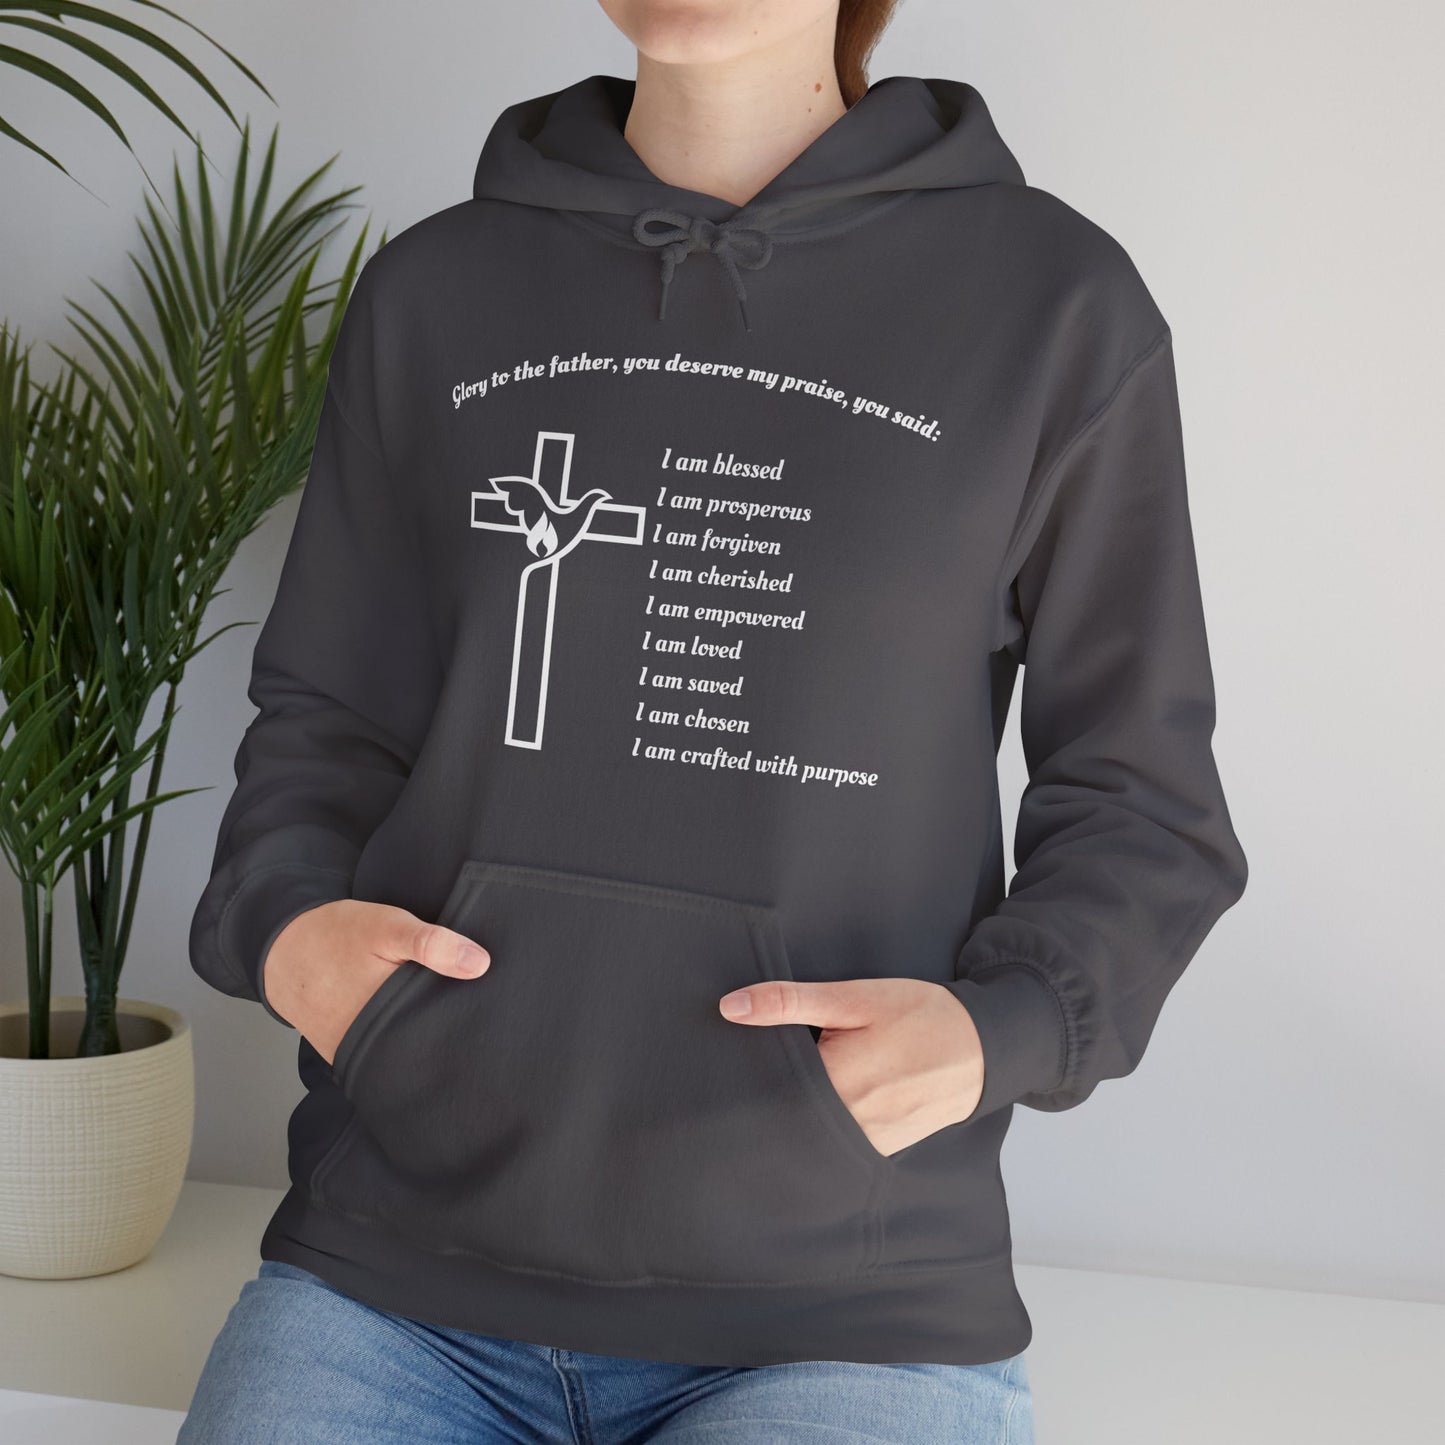 I am Glory to the Father Hooded Sweatshirt Unisex Cozy Heavy Blend19